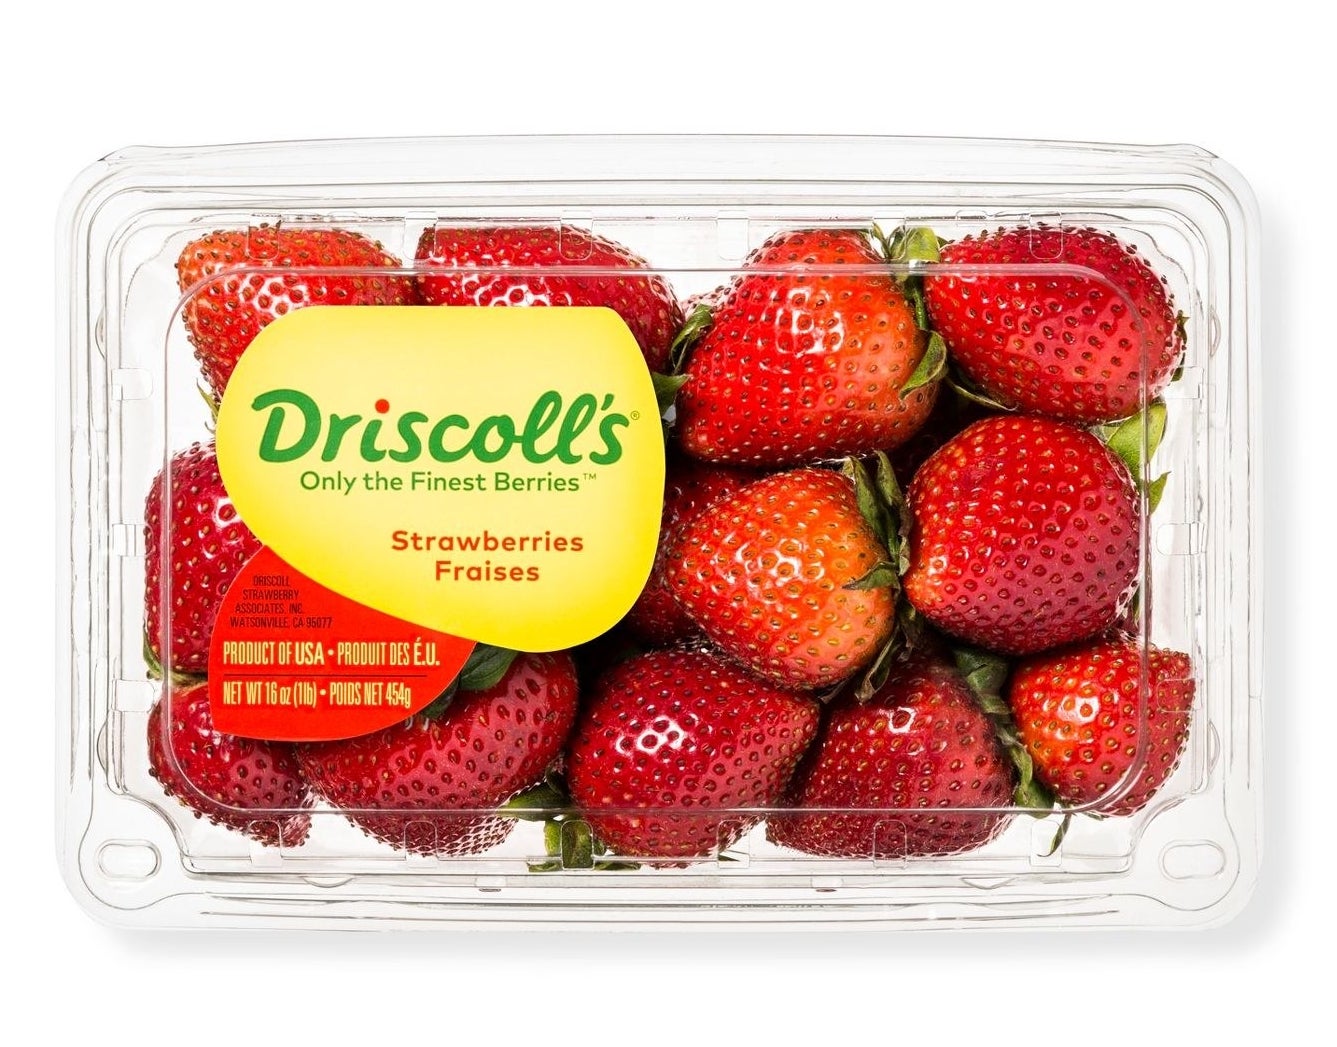 the package of strawberries